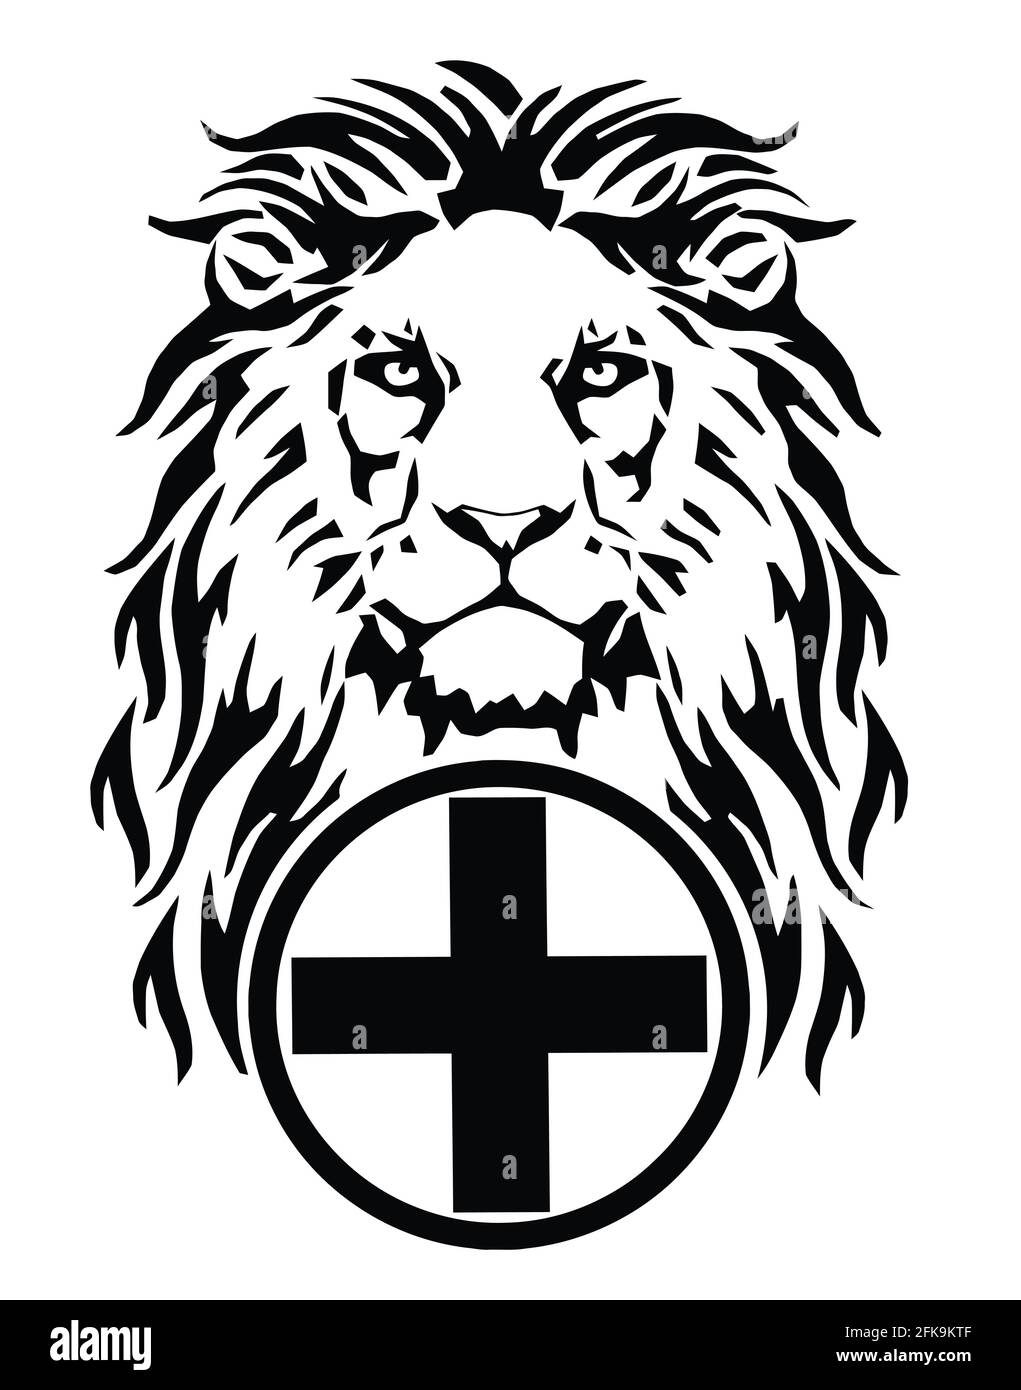 The Lion's head and the symbol of Christianity - the catholic cross, drawing for tattoo, on a white background, illustration, black and white, vector Stock Vector